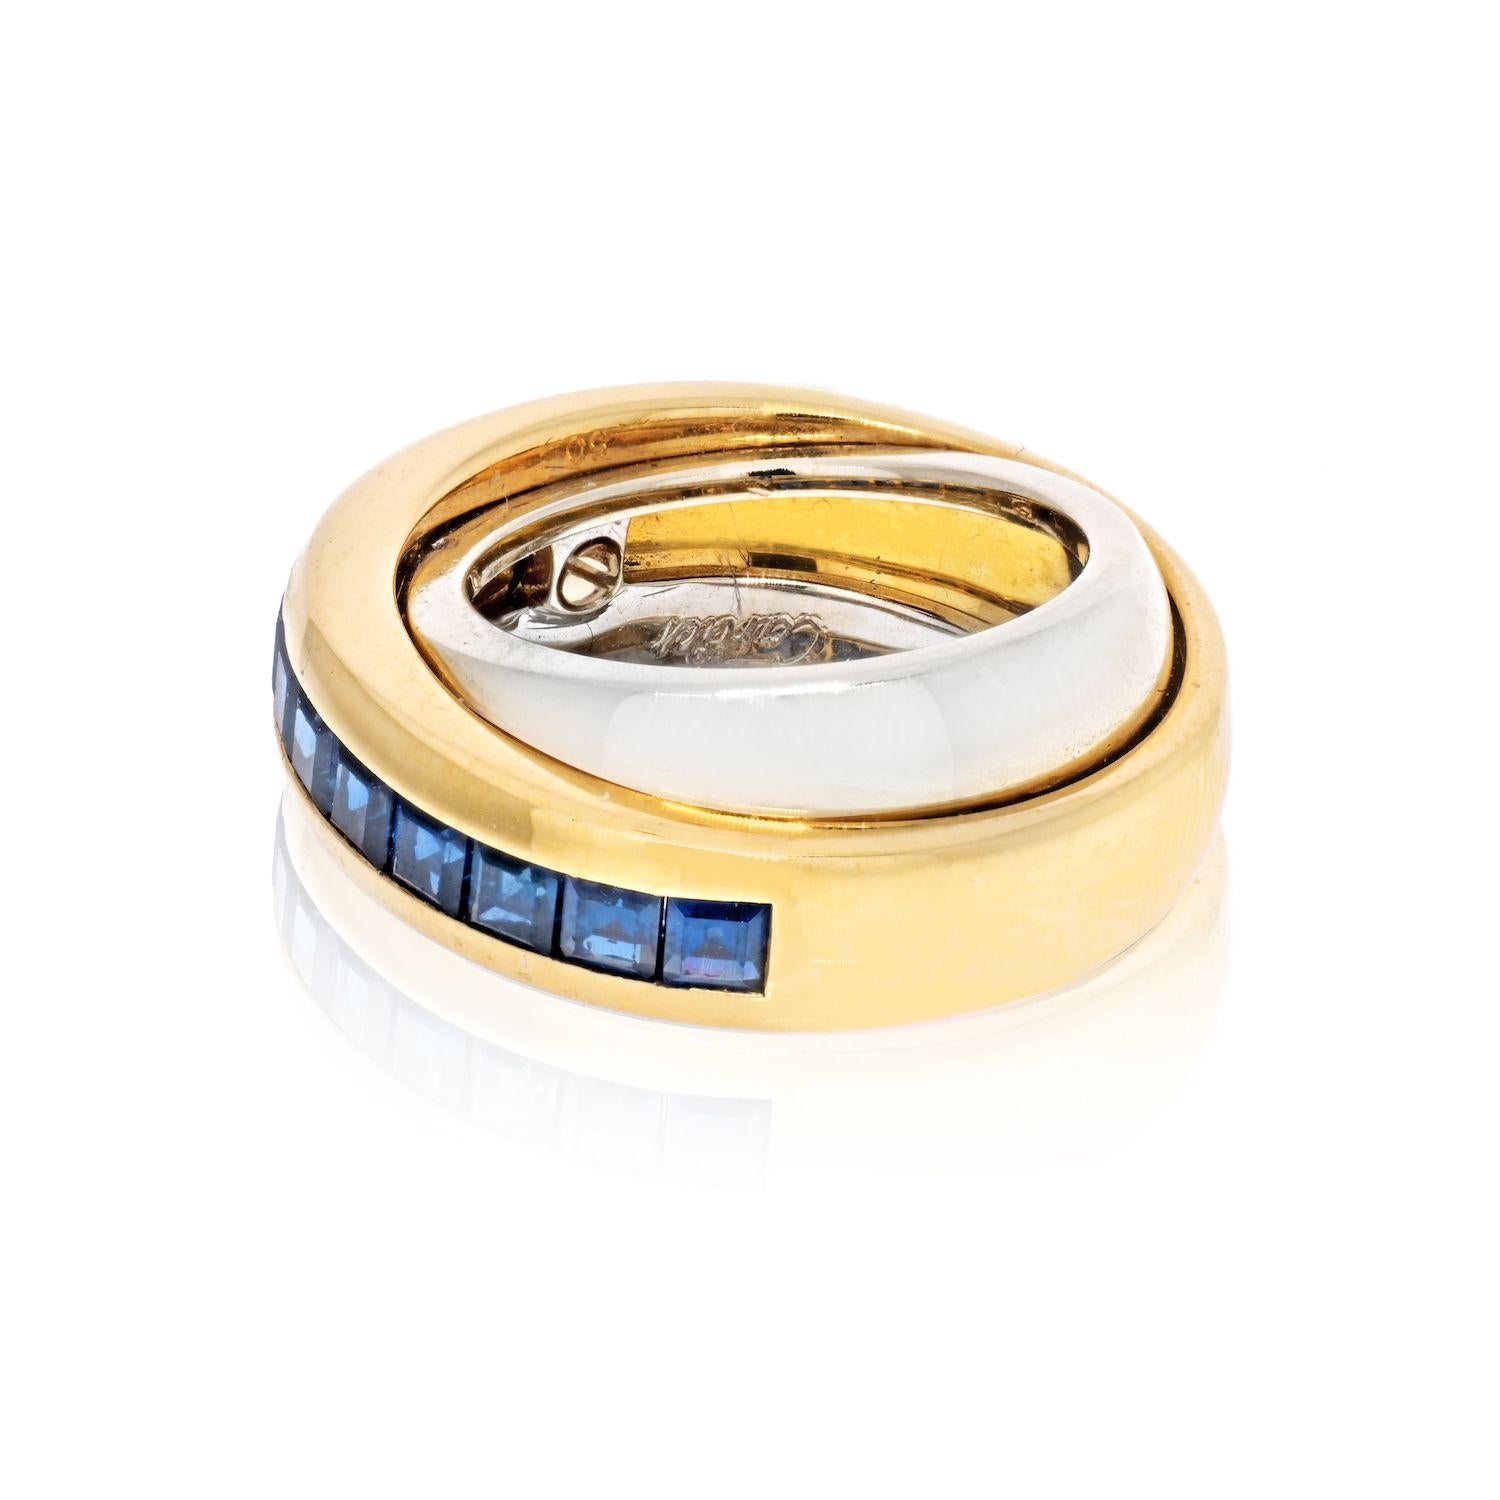 This Cartier double band ring in bi-color gold and sapphires is stylish and modern, dating from the 1990s. The upper yellow gold band is channel-set with a central line of nine square step-cut sapphires, sitting above a plain polished broad band of